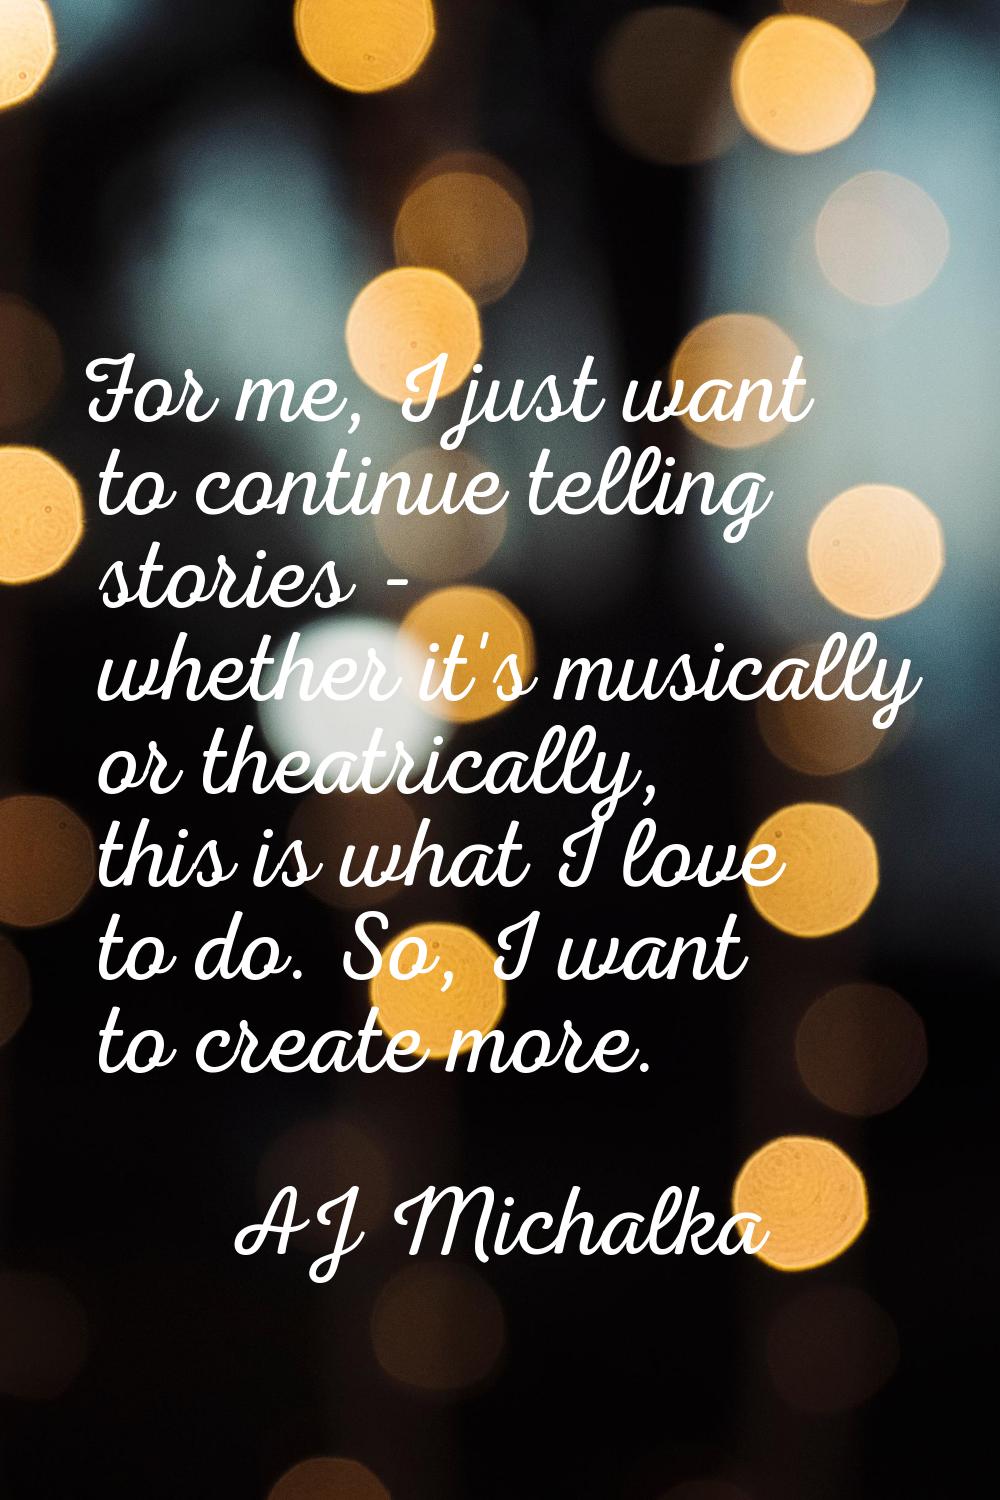 For me, I just want to continue telling stories - whether it's musically or theatrically, this is w